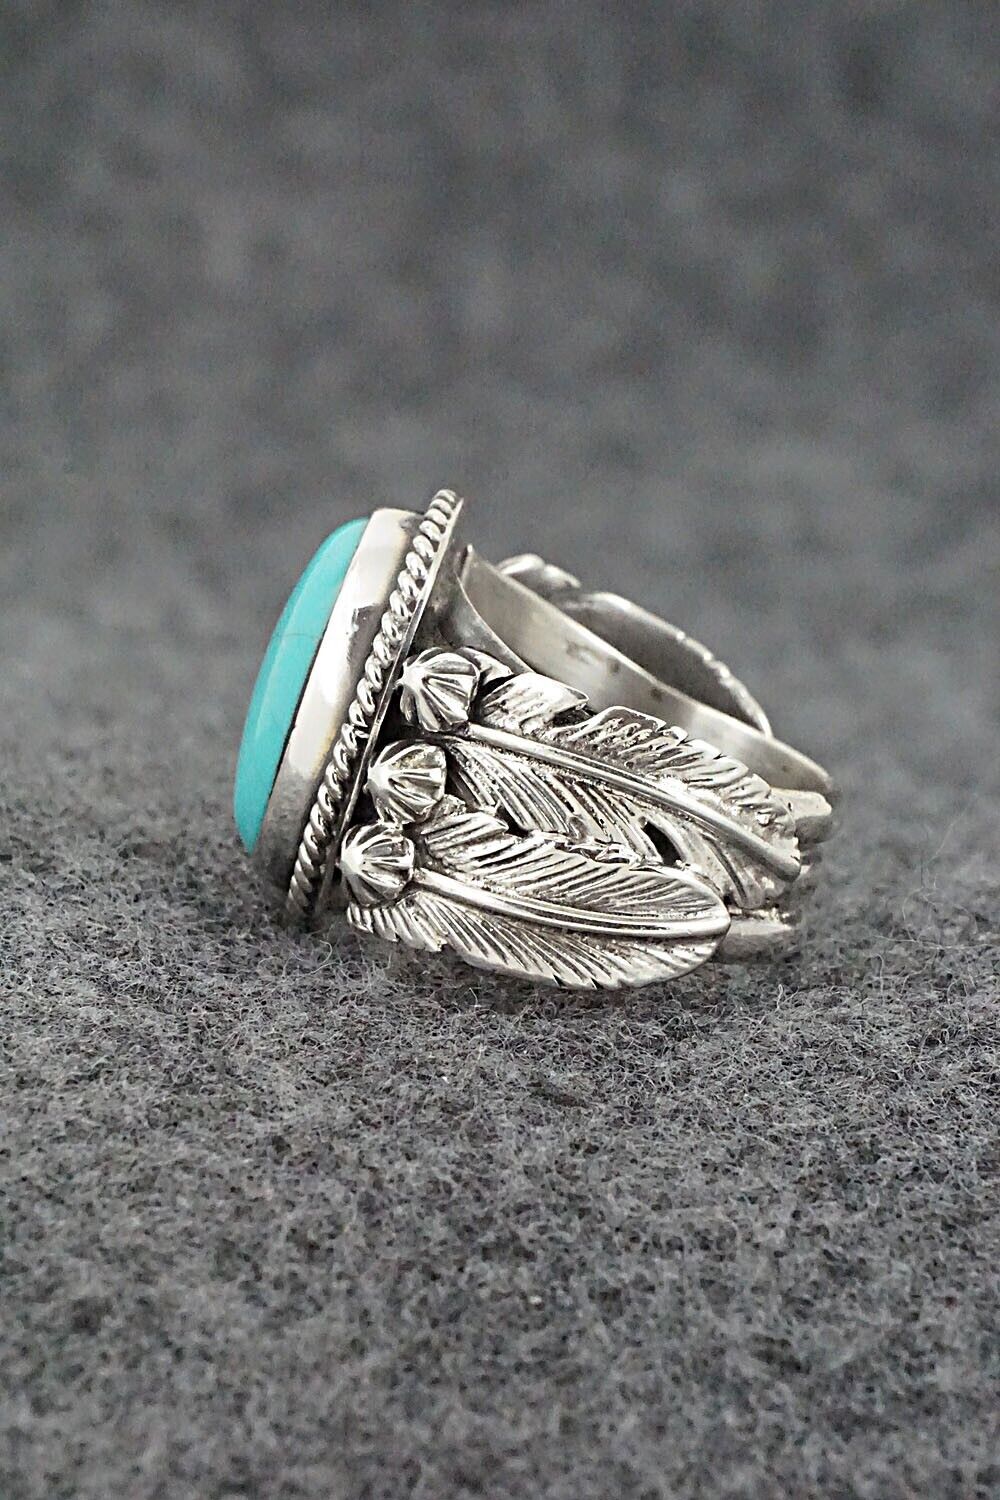 Turquoise & Sterling Silver Ring - Bobby Platero - Size 6.5